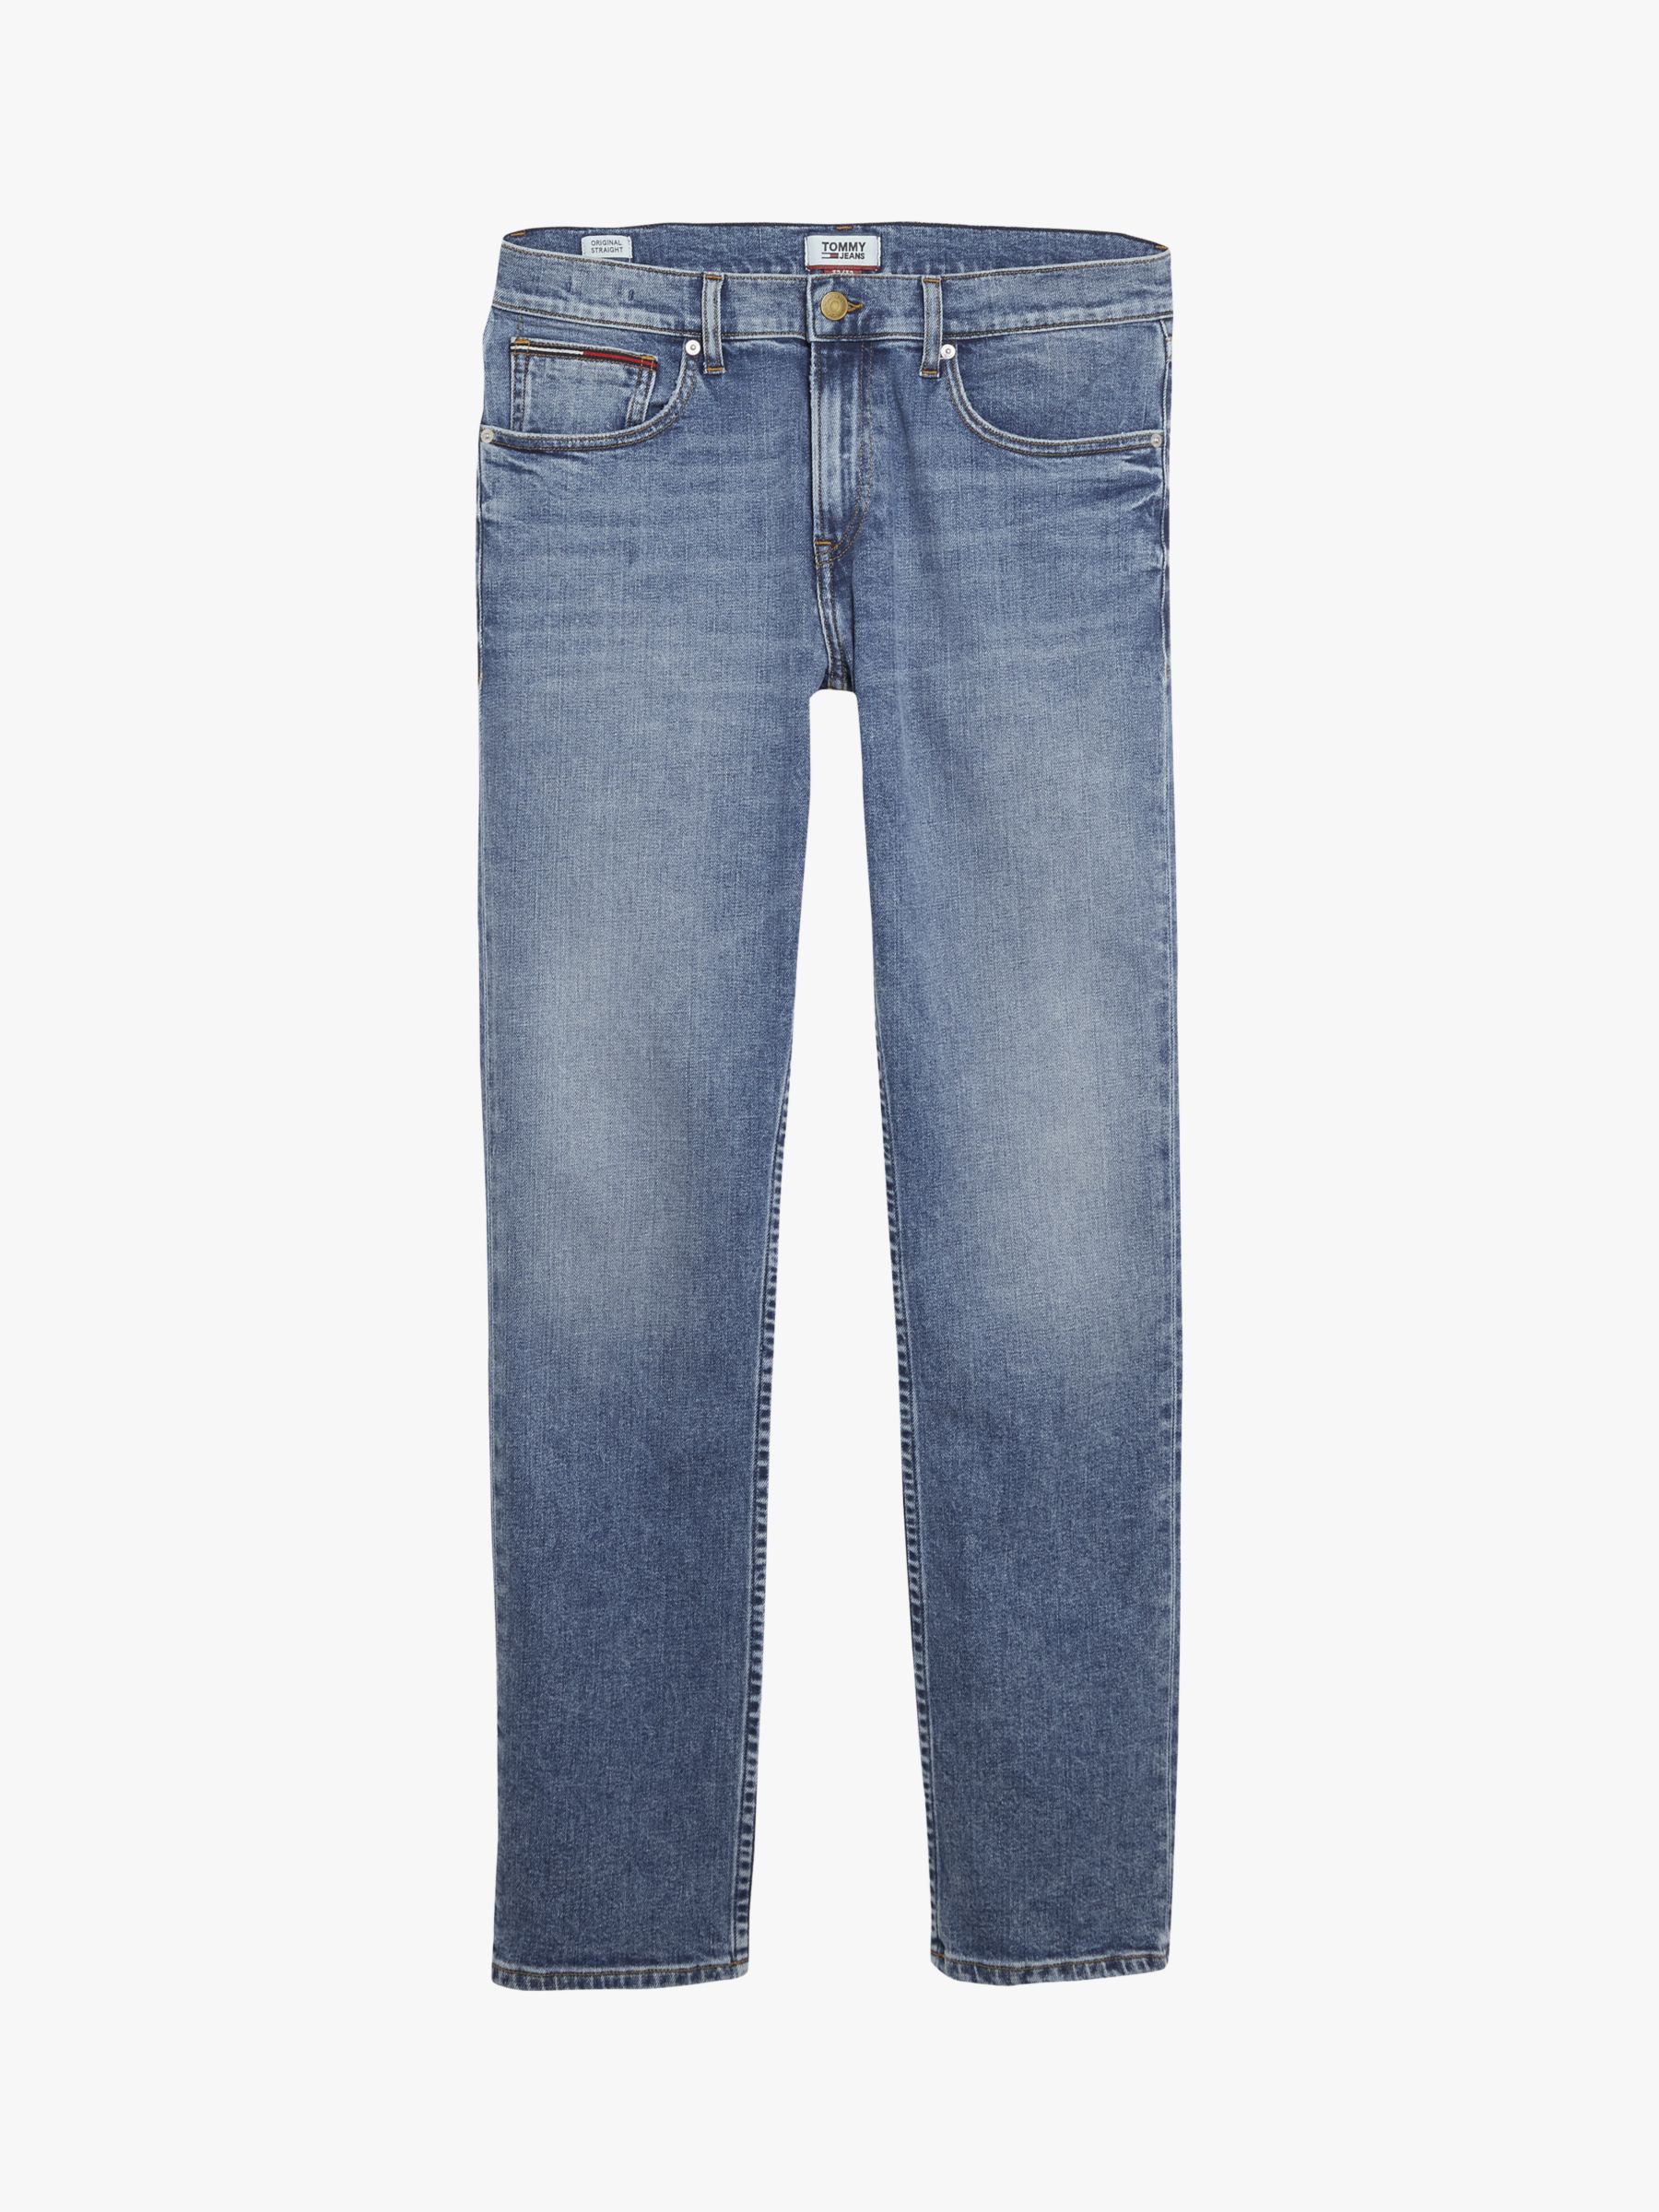 Tommy Jeans Ryan Original Straight Jeans, Dallas Mid Blue